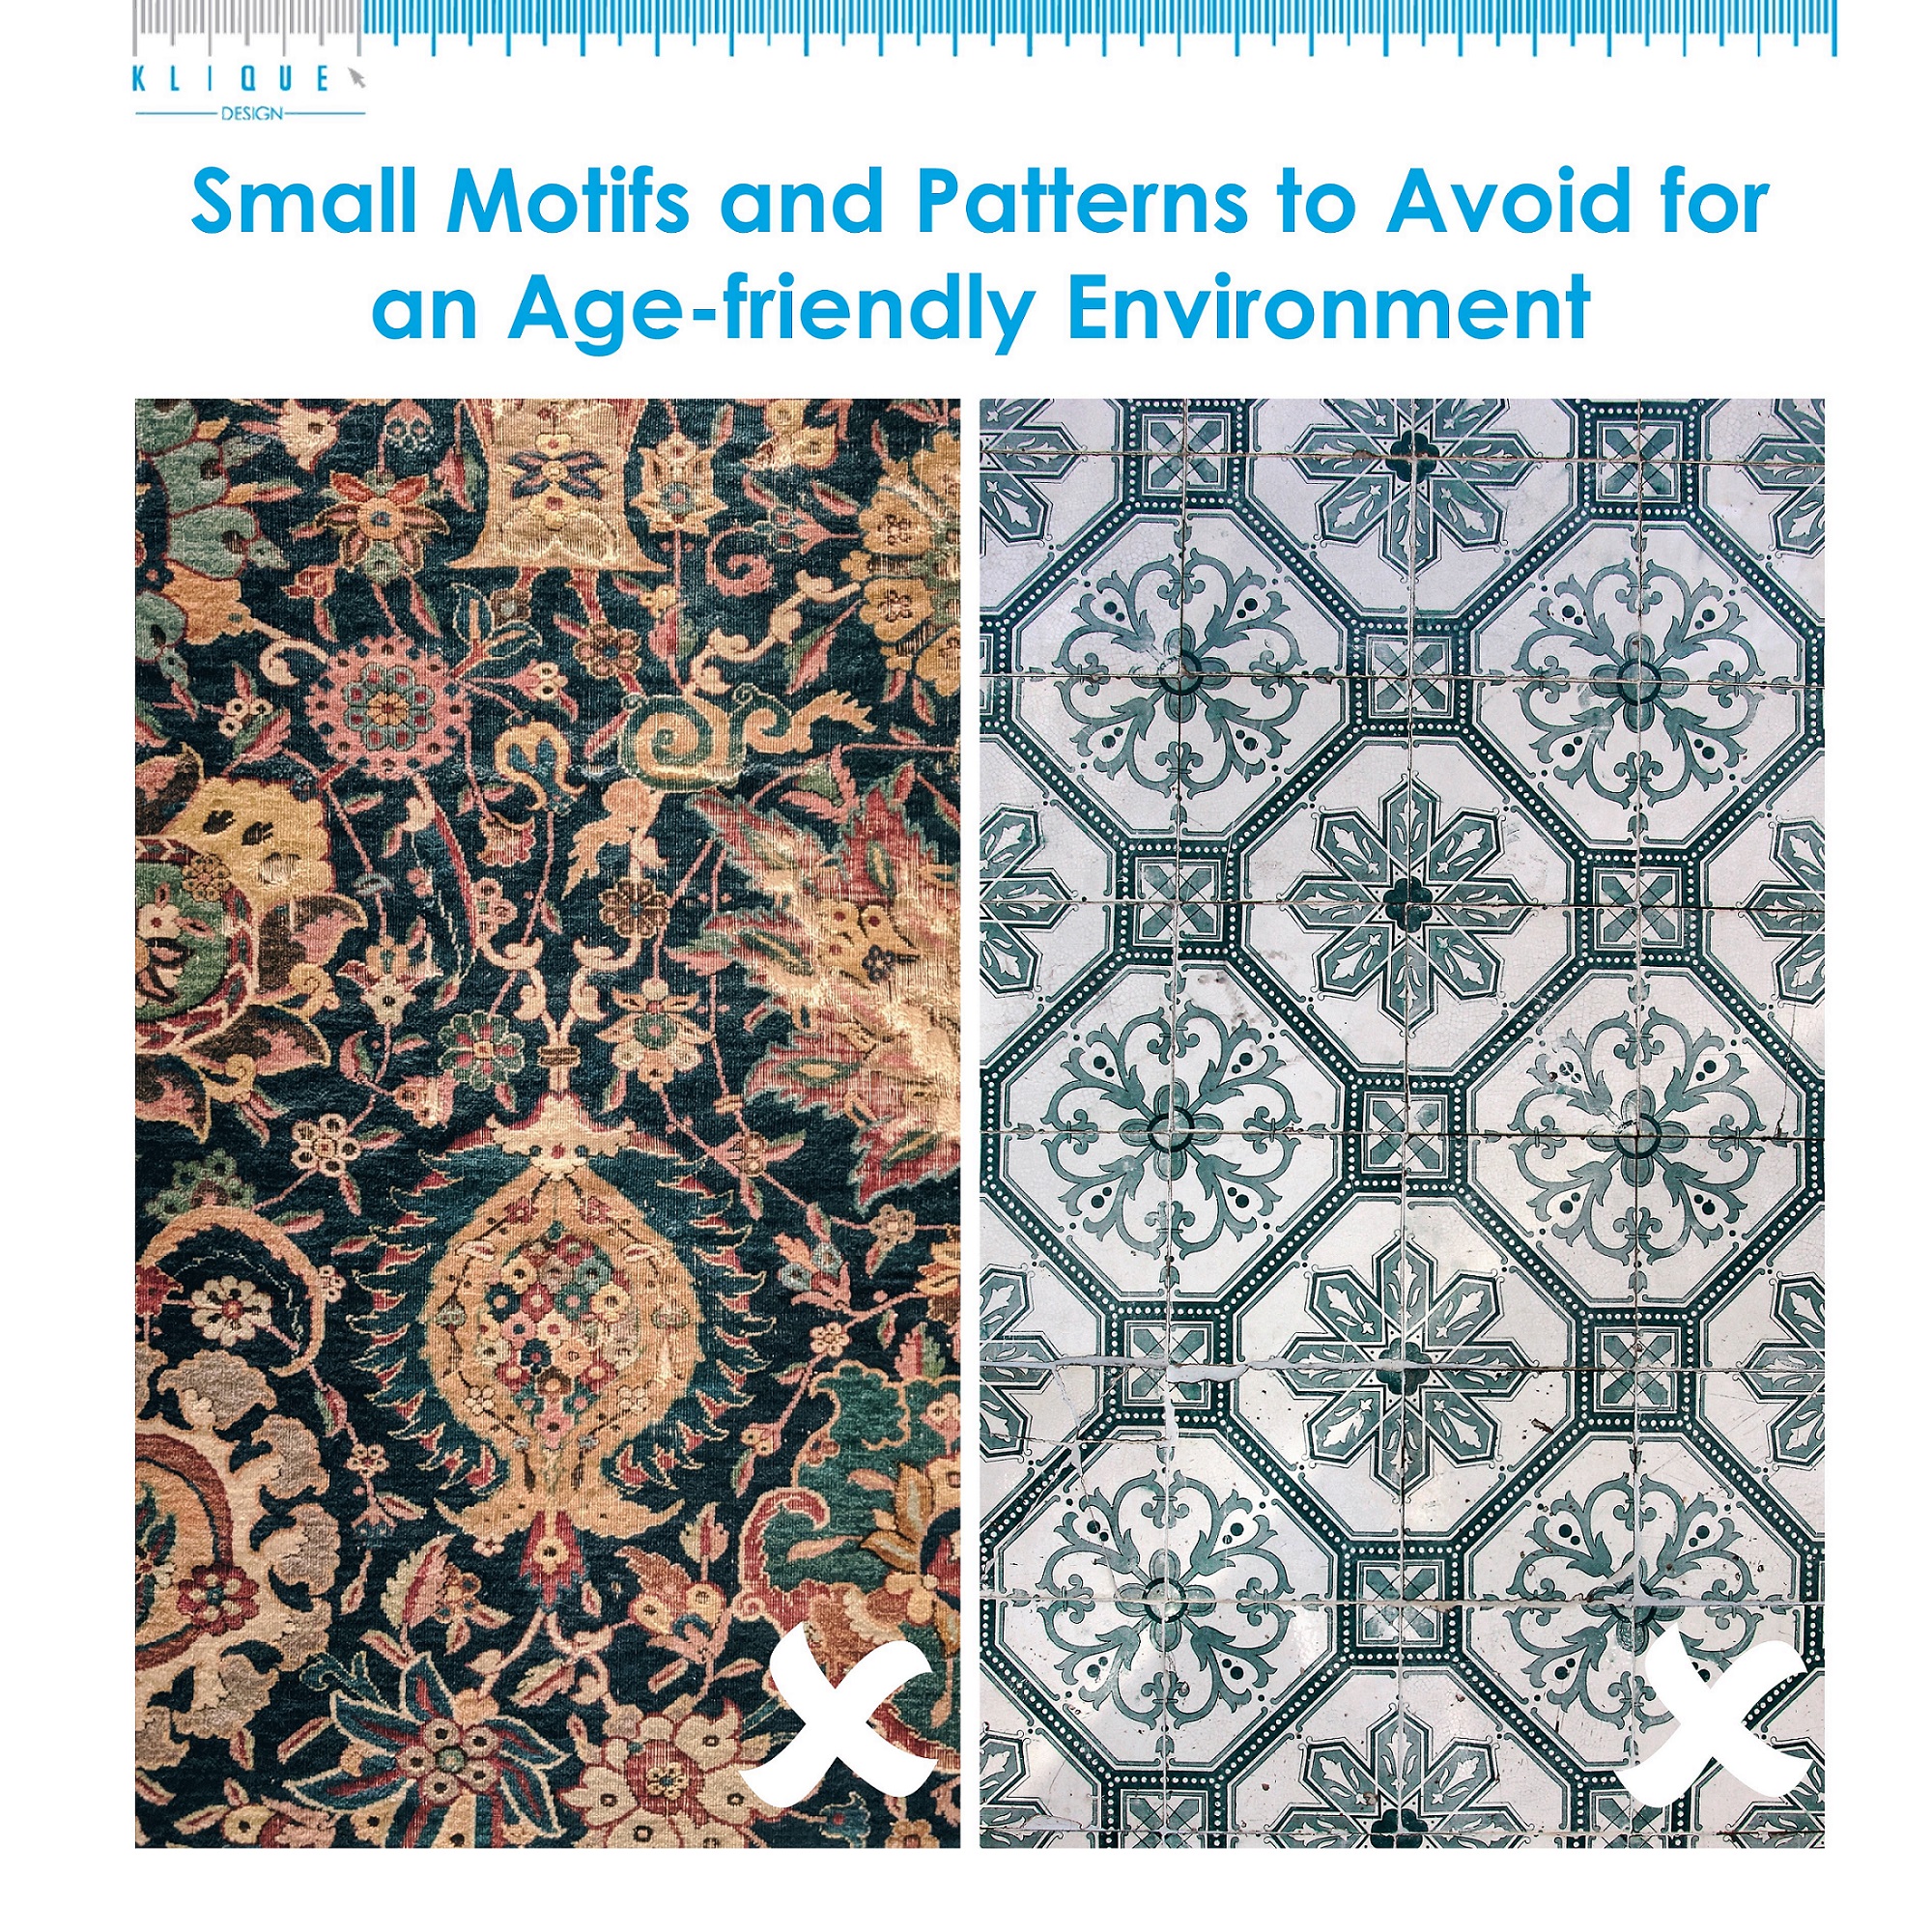 Small motifs and patterns to avoid for an age-friendly environment